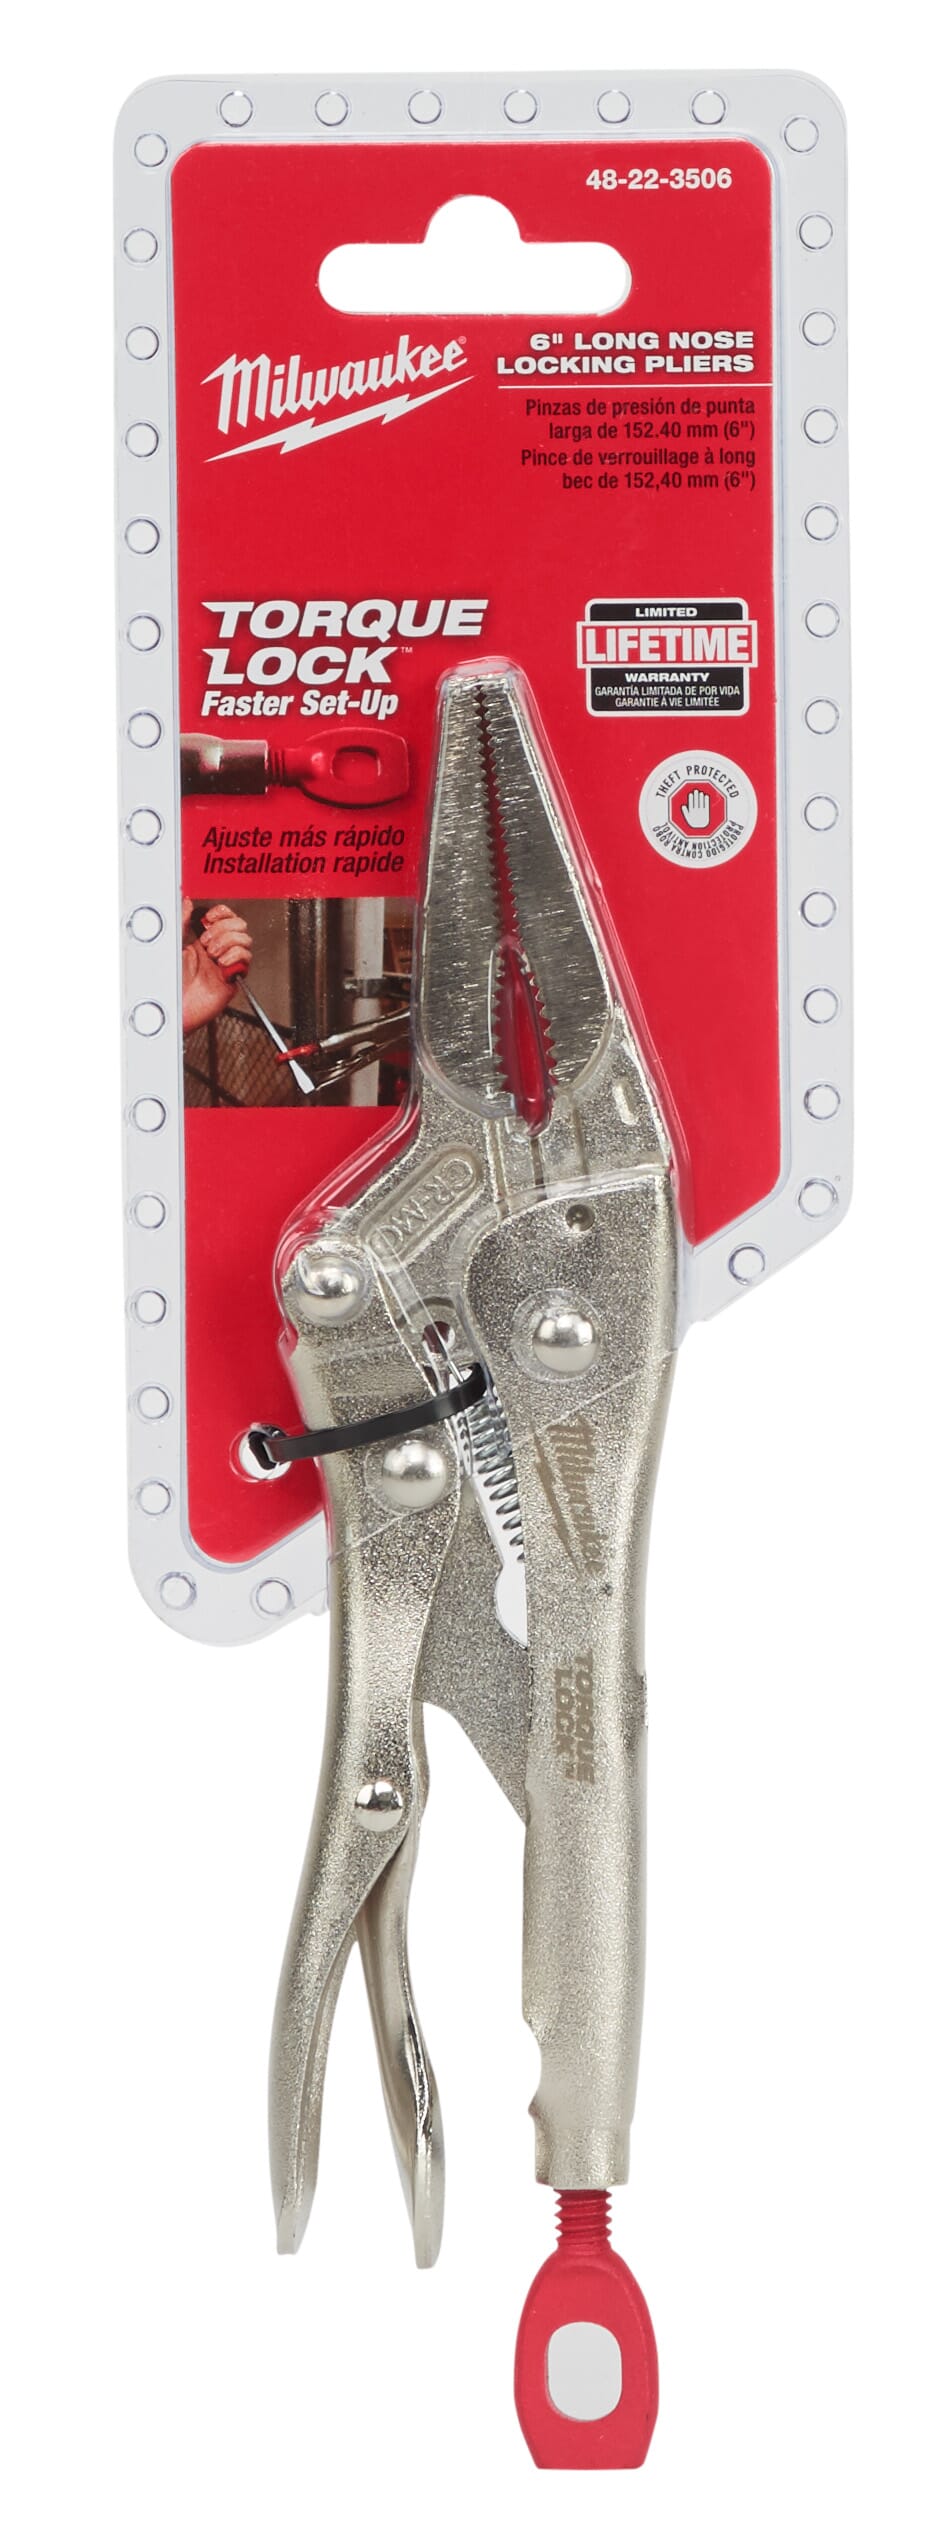 Milwaukee® TORQUE LOCK™ 48-22-3506 Locking Plier With Wire Cutter, 2 in Nominal, 1-39/64 in L x 29/64 in W Forged Alloy Steel Long Nose Curved Jaw, 6 in OAL, ASME Specified